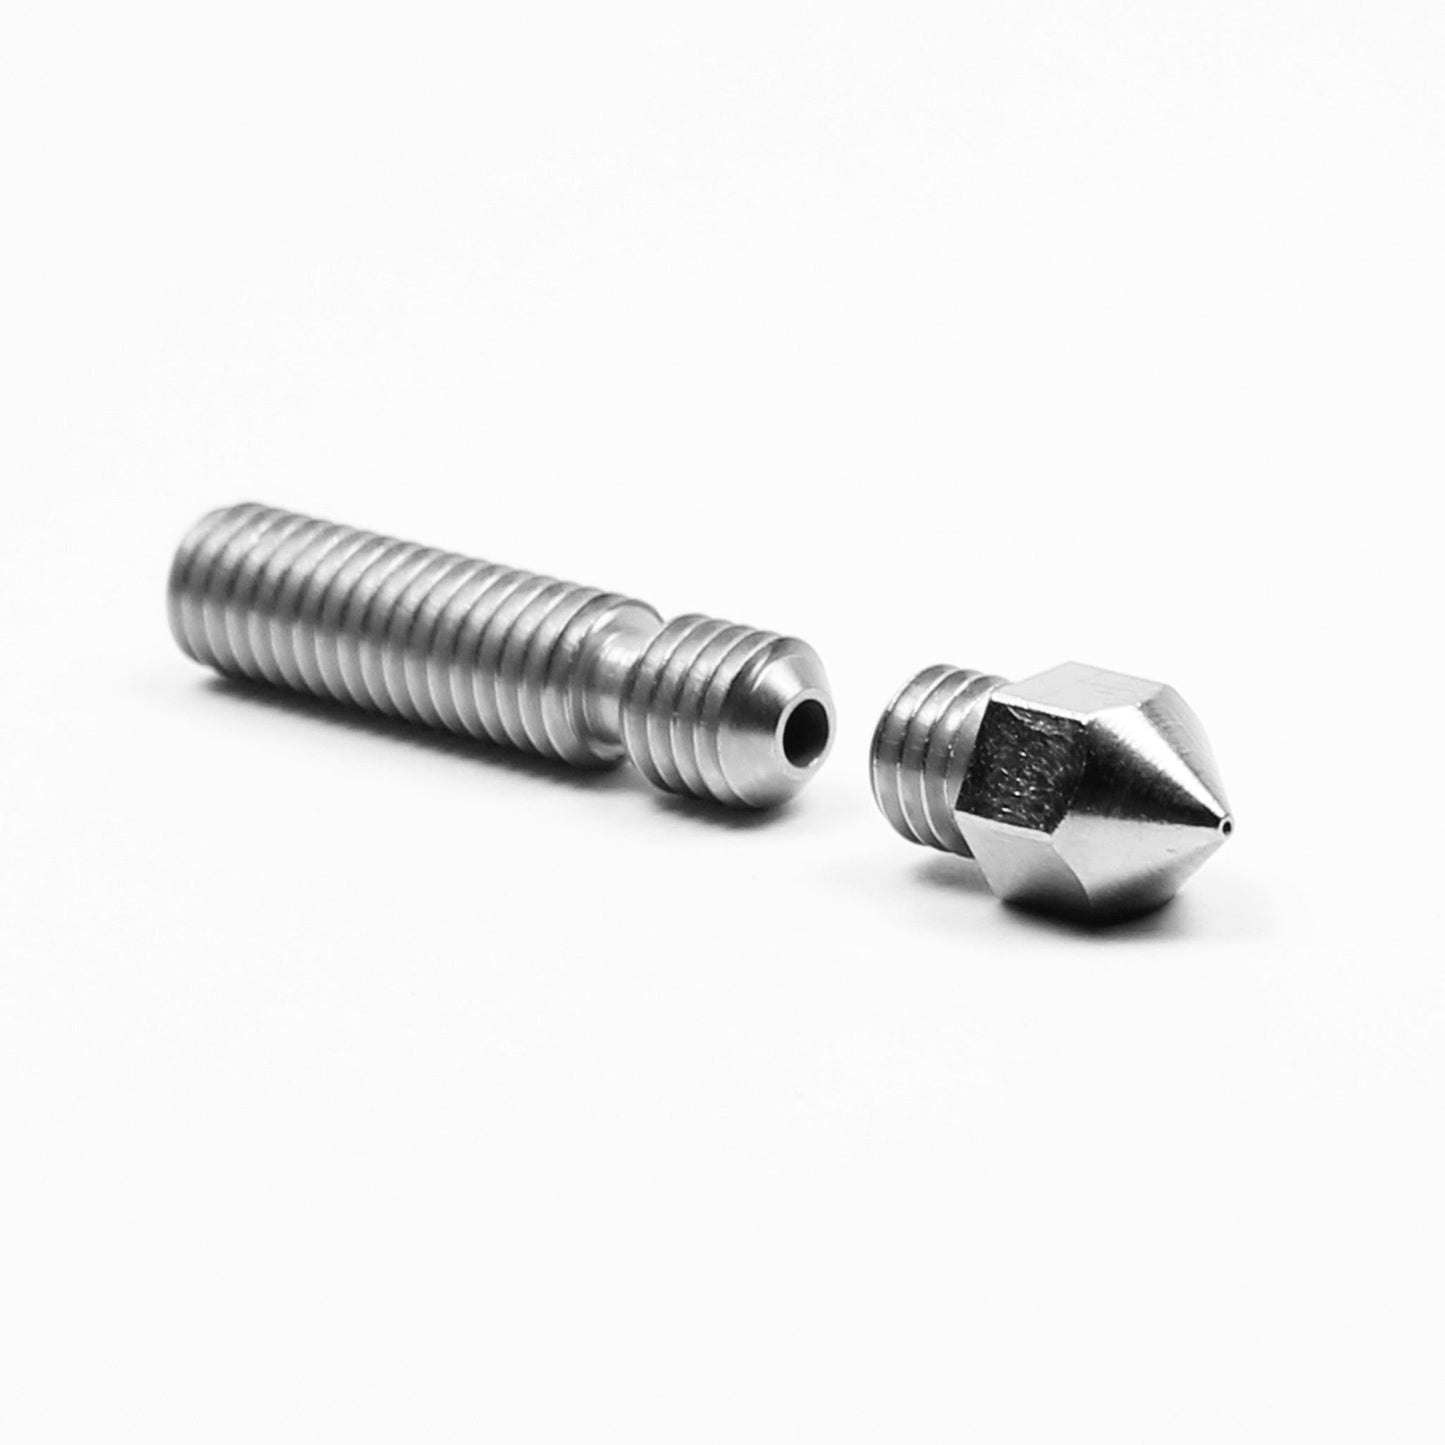 MK8 Plated Wear Resistant All Metal Hotend Upgrade - 0.4mm